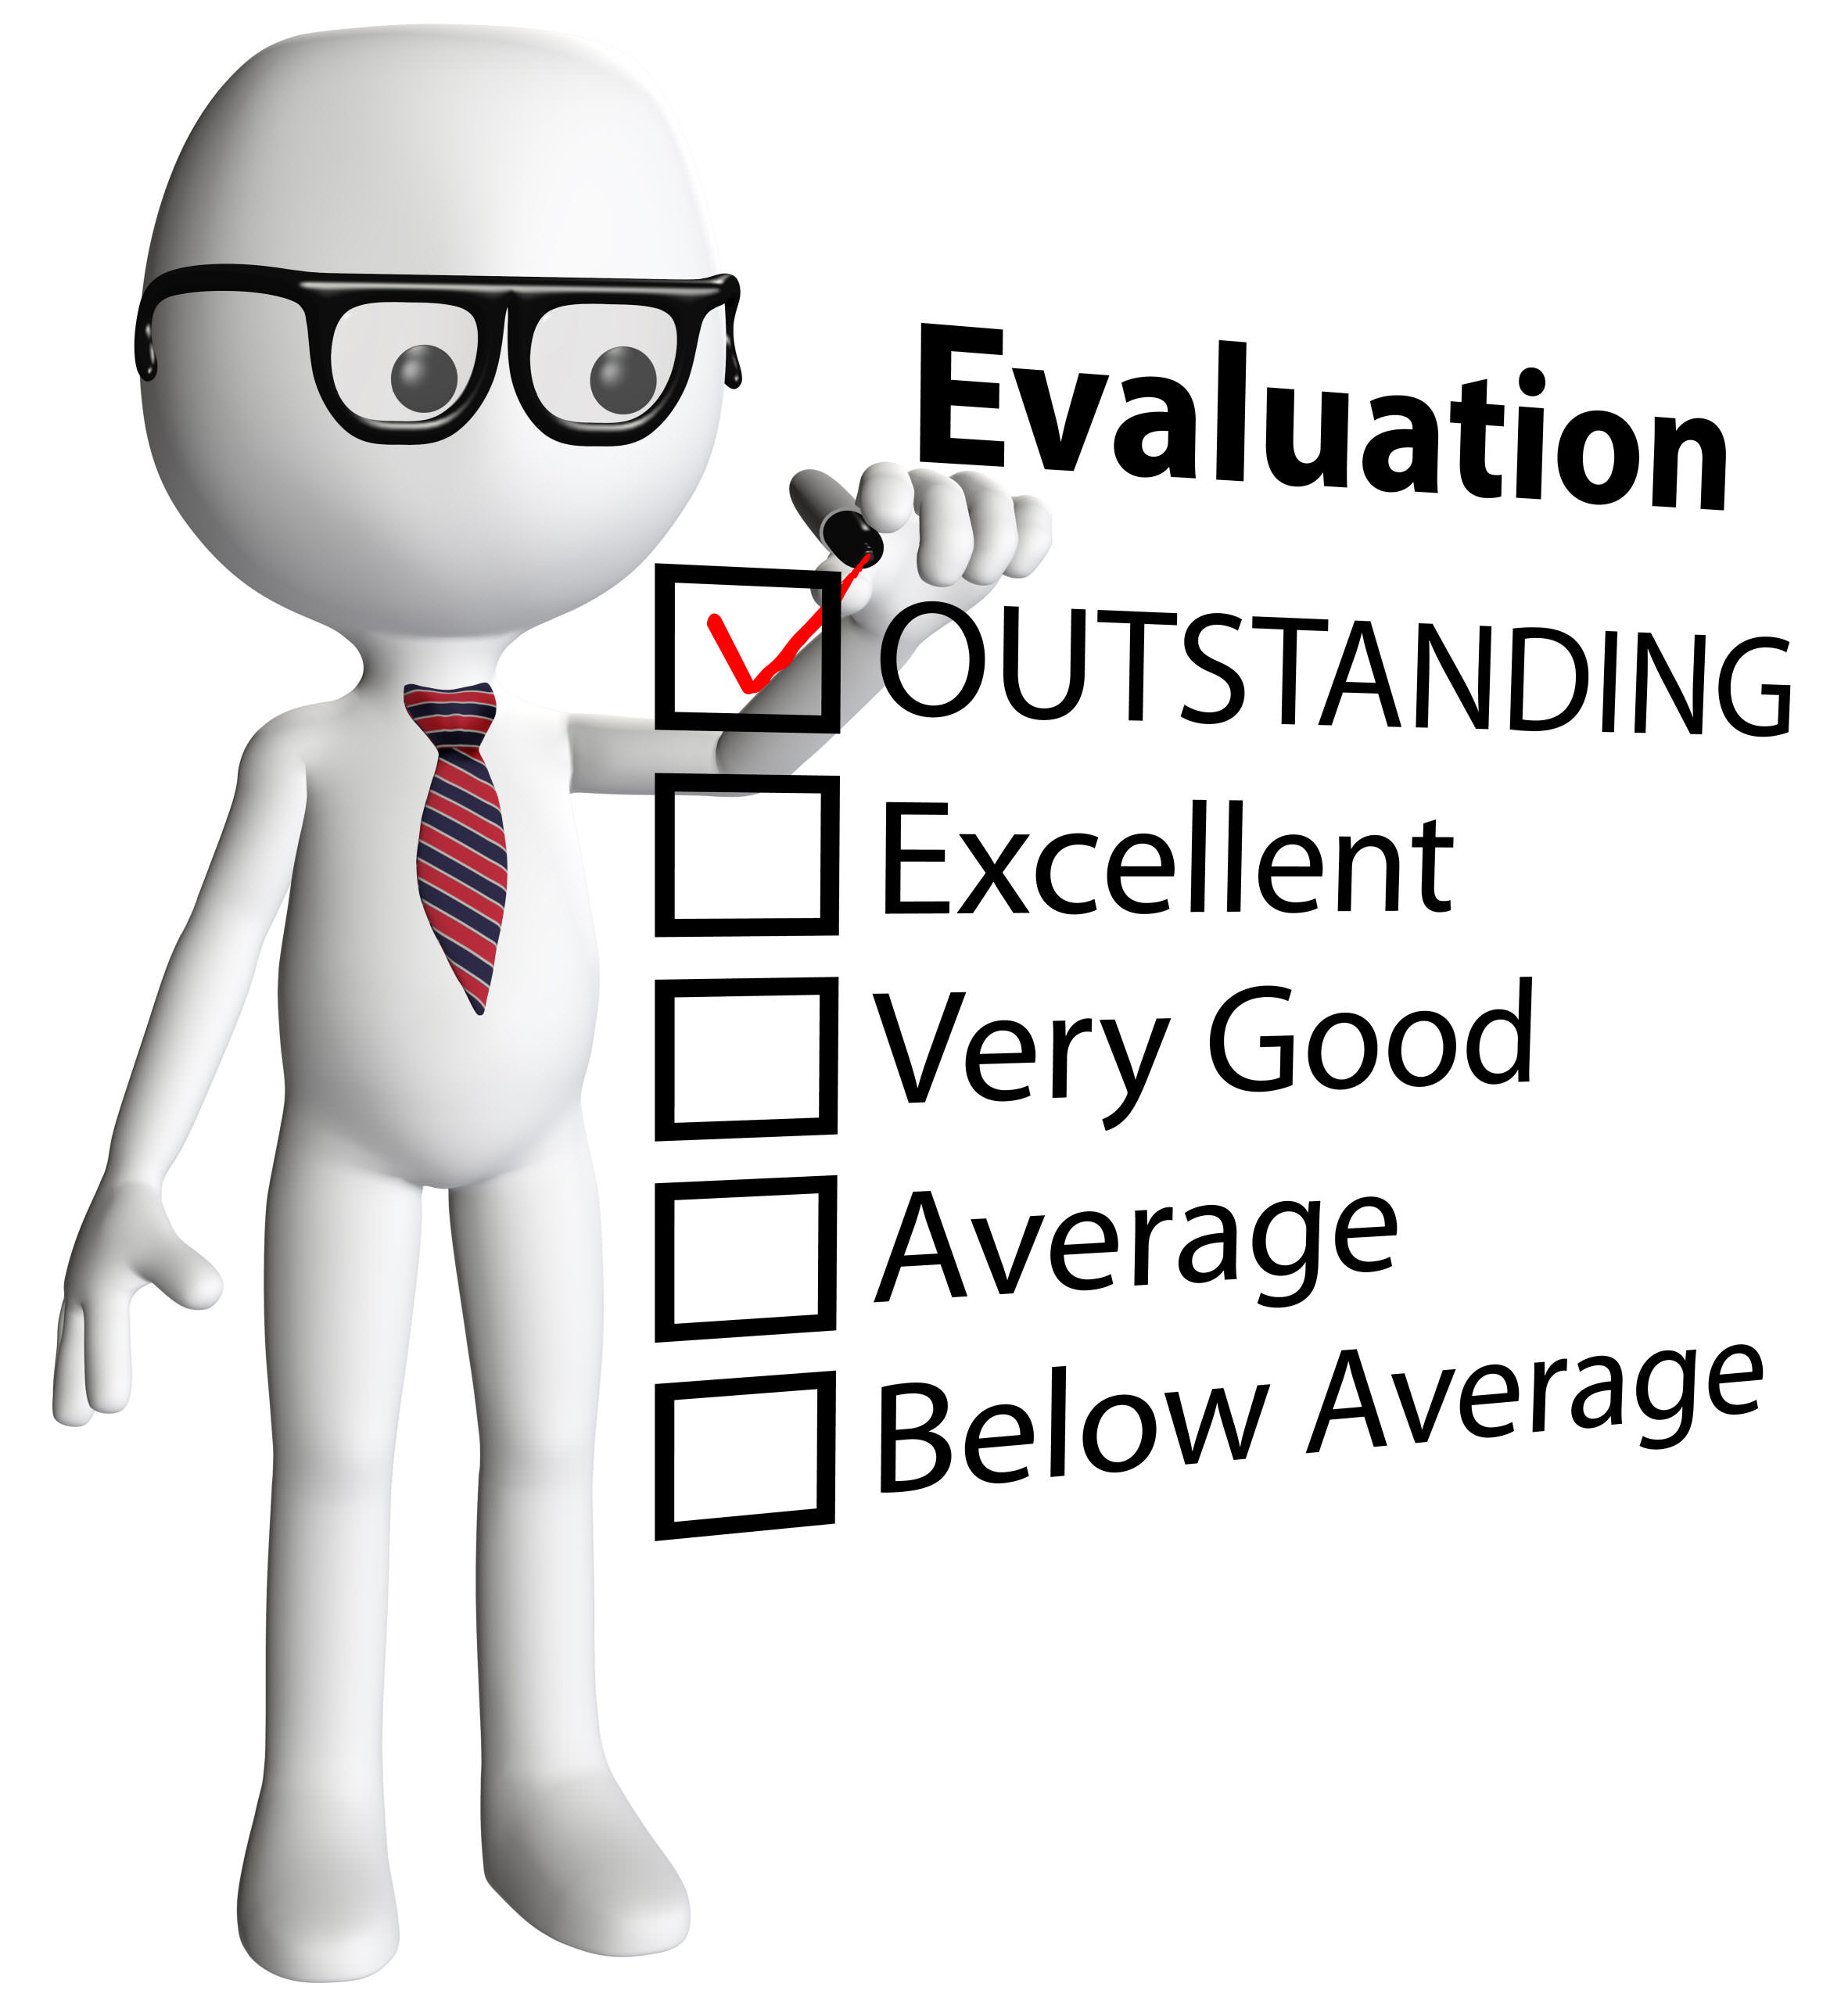 Employee Performance Appraisal And Evaluation Phrases